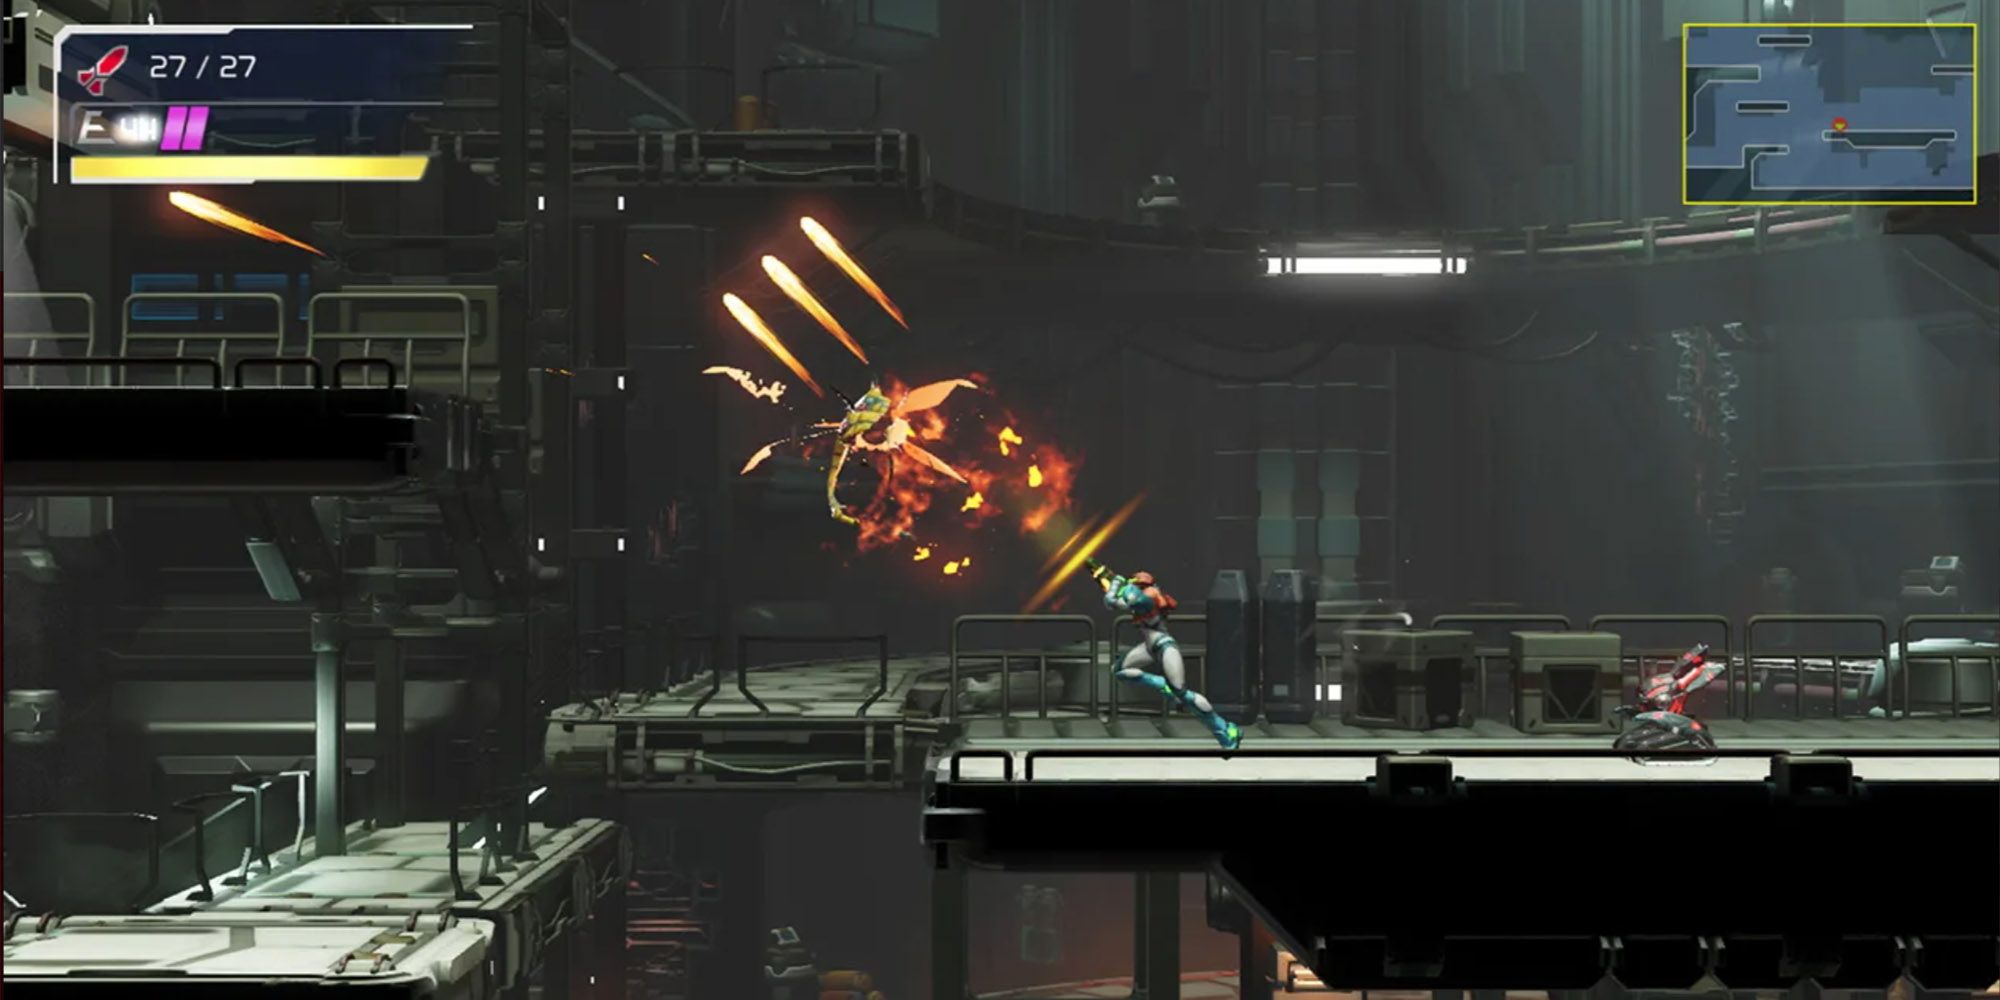 Samus fighting an enemy in a gameplay still from Metroid Dread.